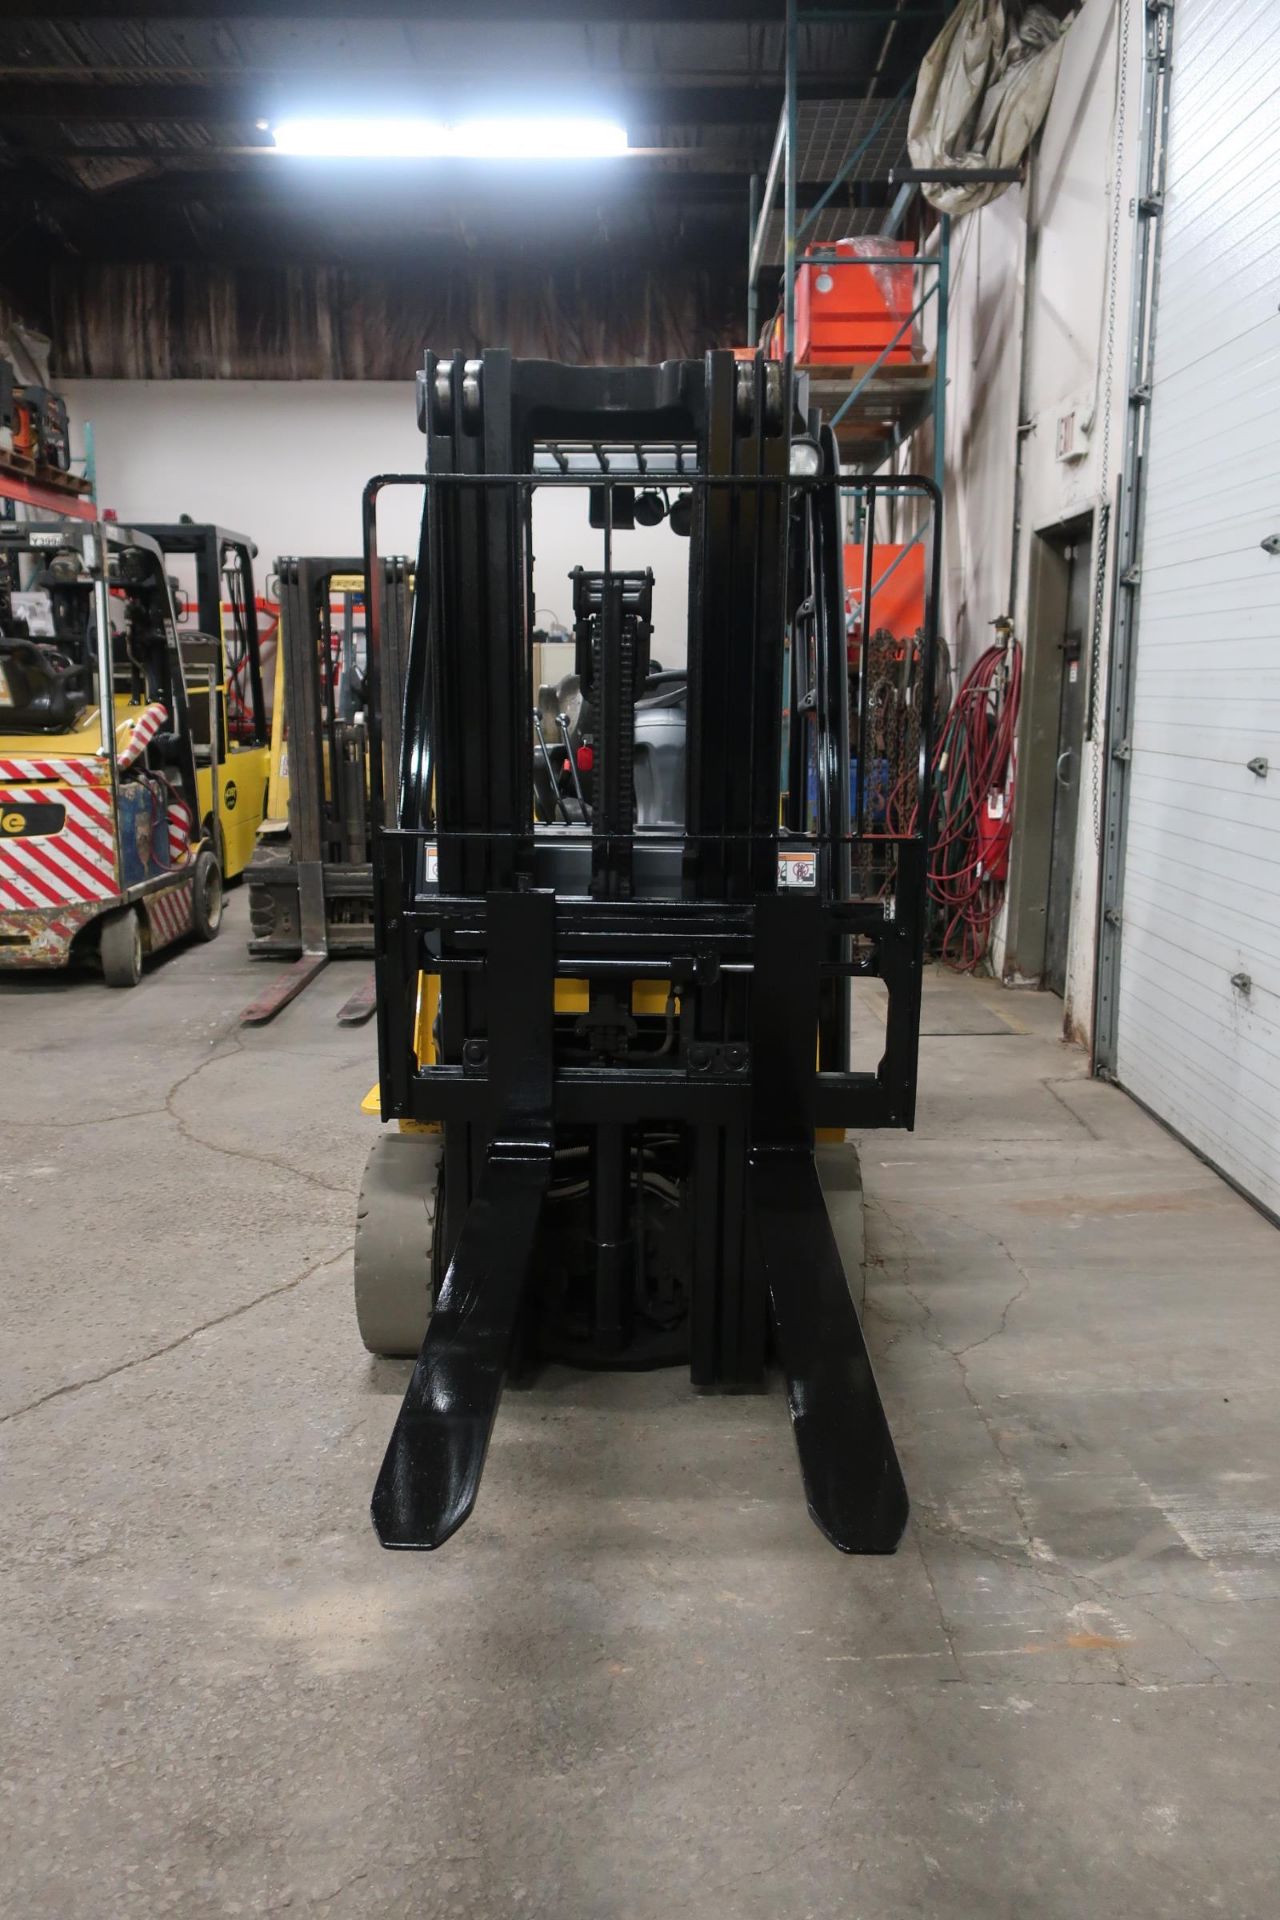 FREE CUSTOMS - 2012 Yale 5000lbs Capacity Forklift with 3-stage mast - LPG (propane) with - Image 2 of 2